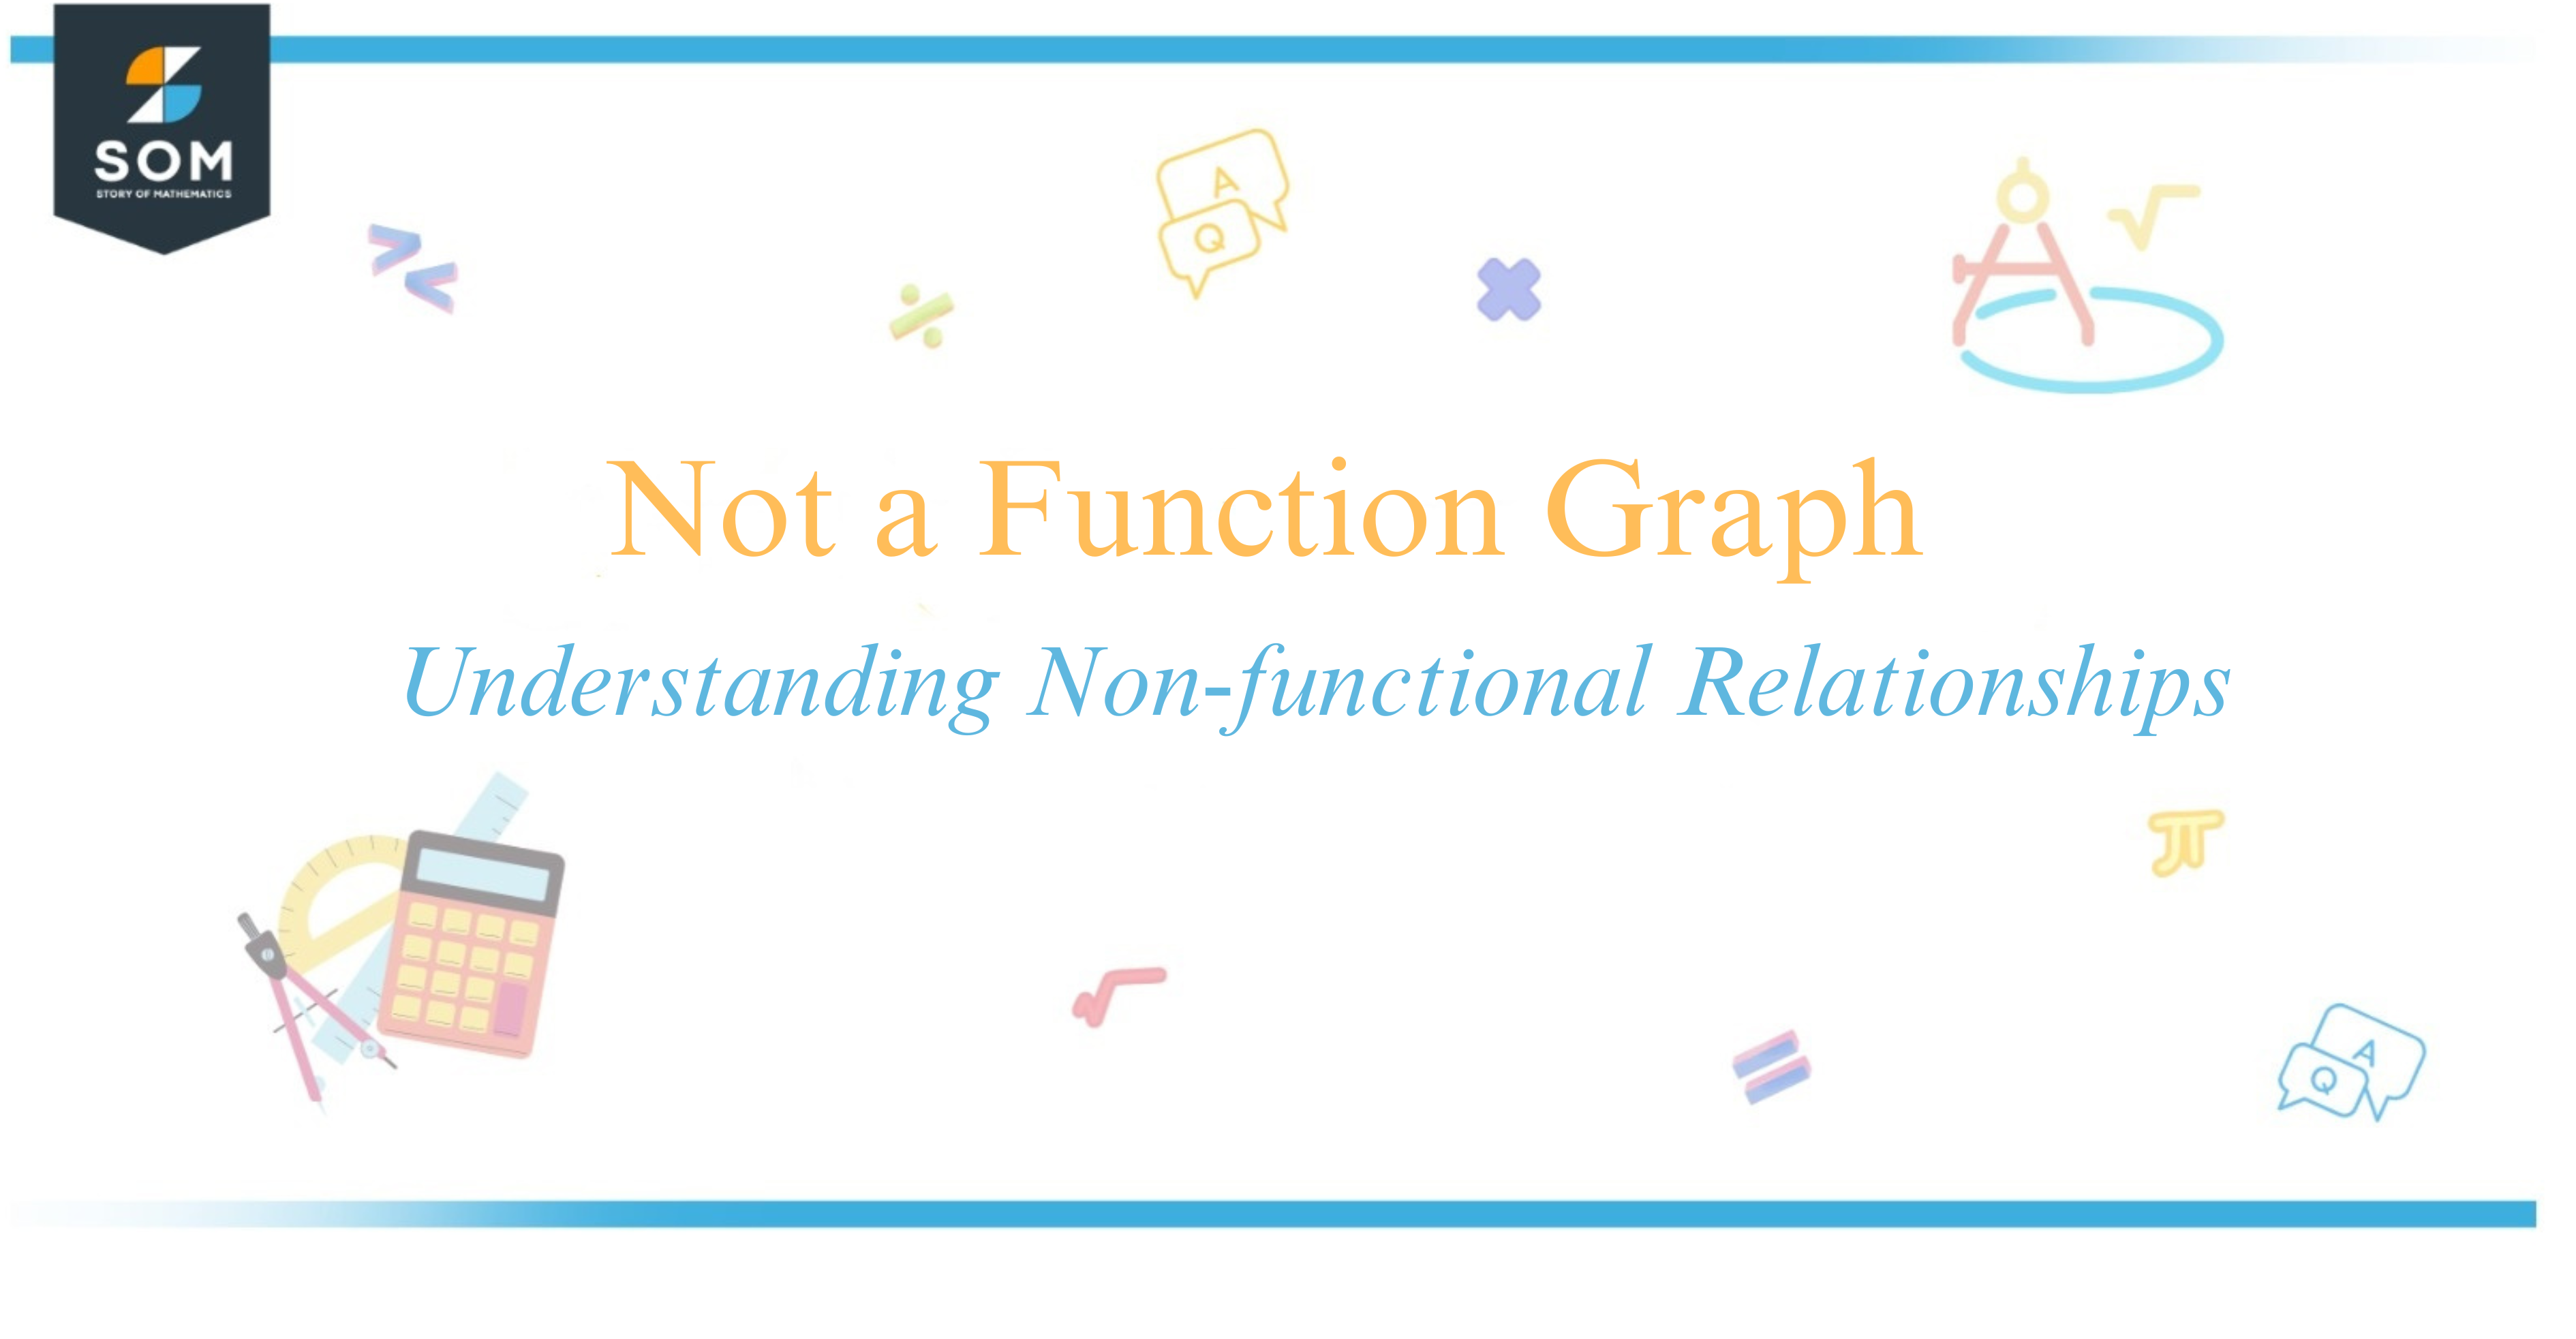 Not a Function Graph Understanding Non-functional Relationships